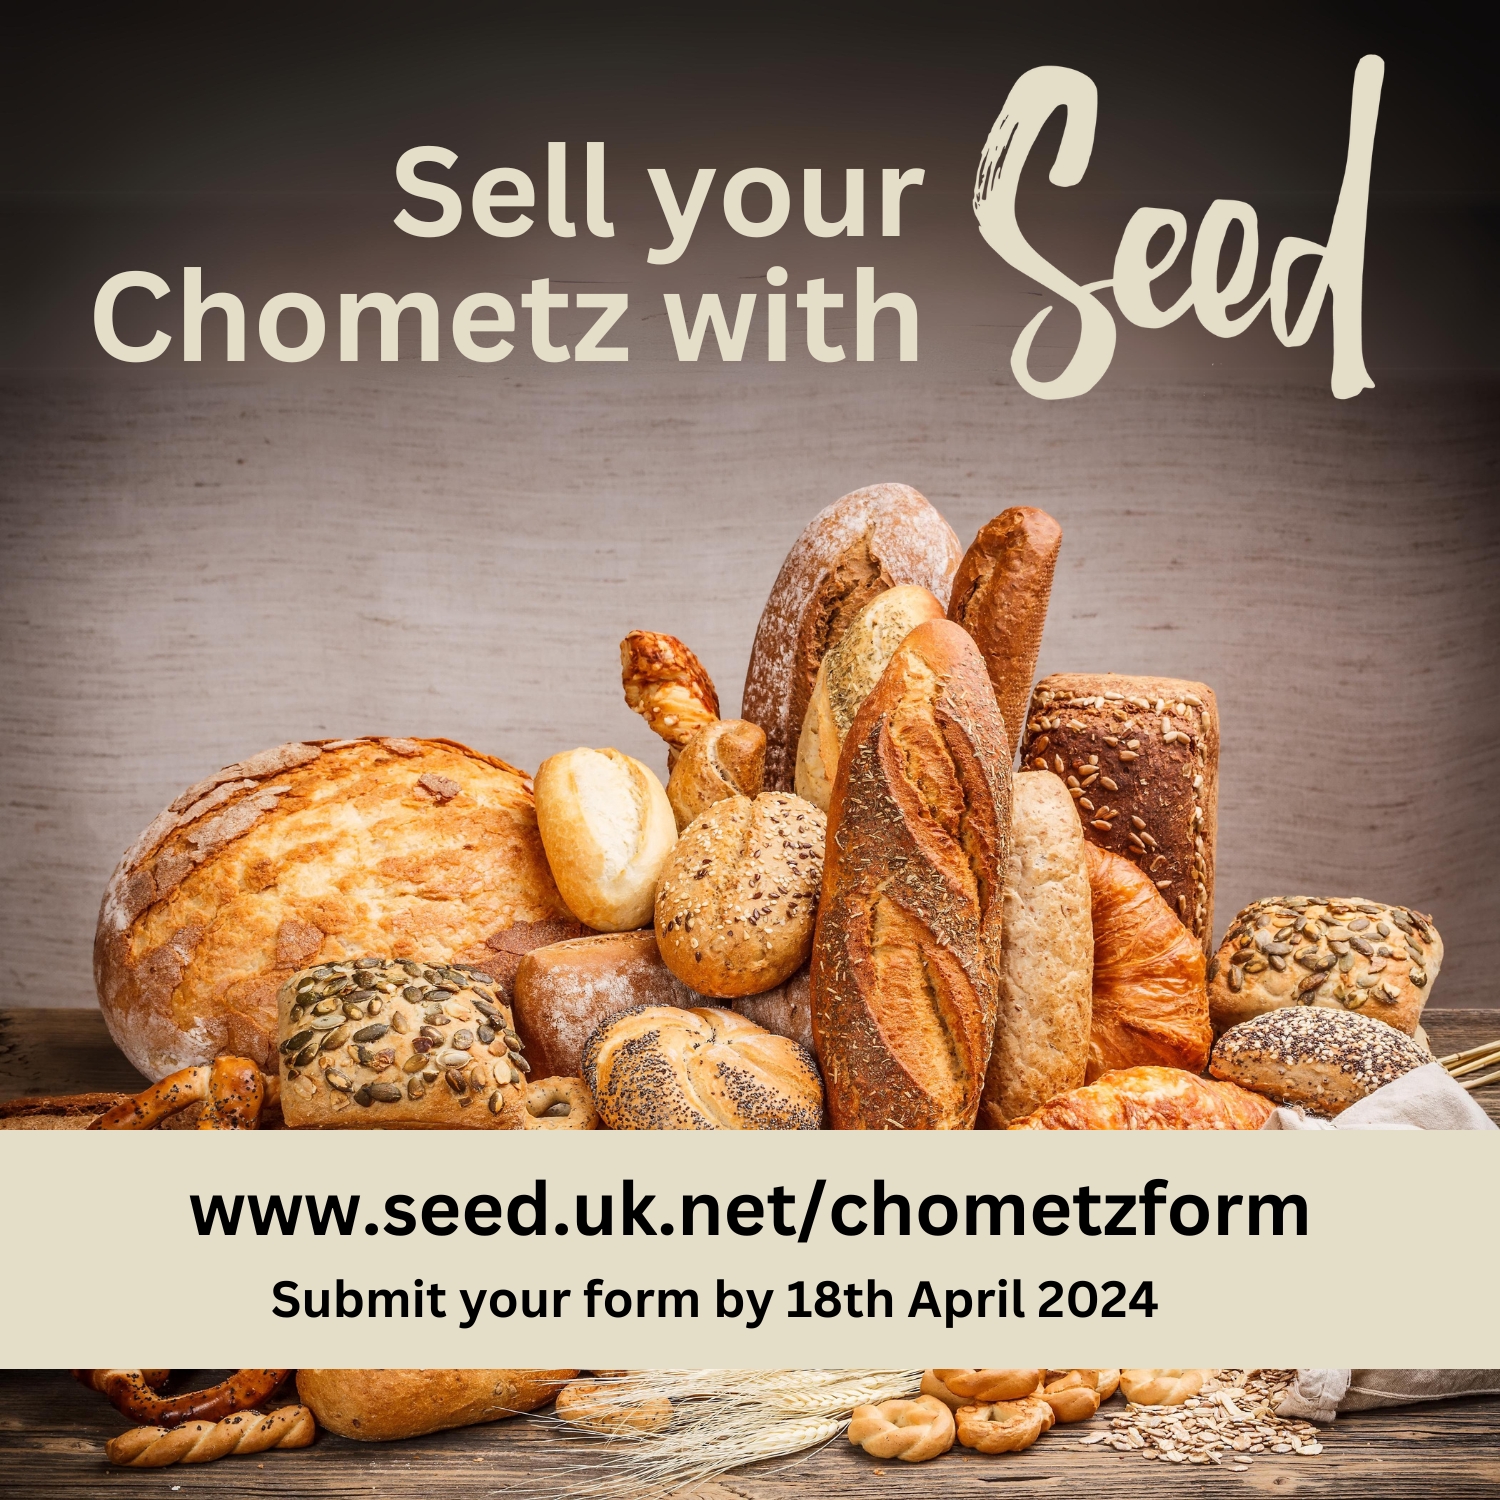 You are currently viewing Sell your Chometz with Seed